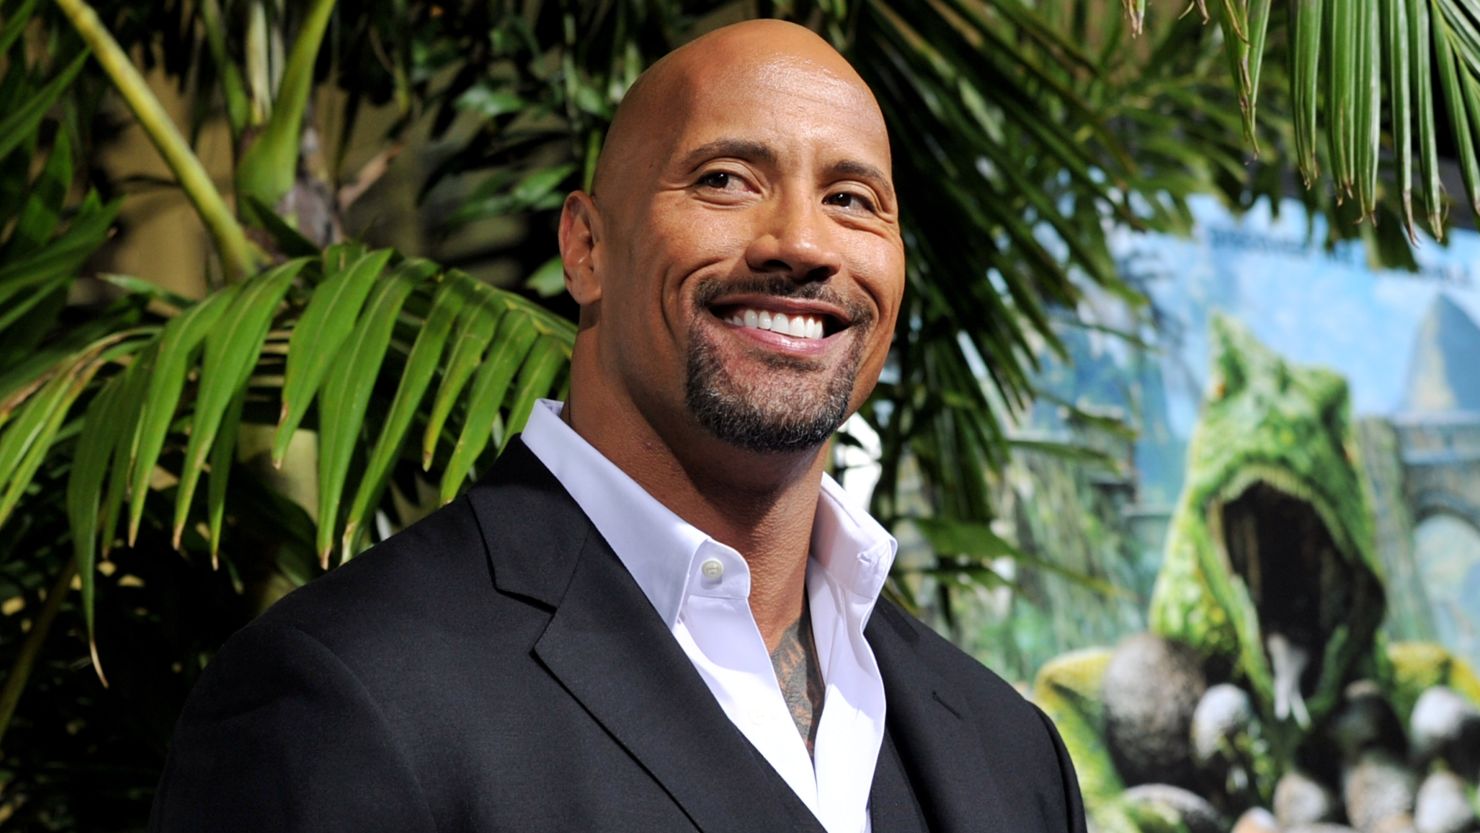 Dwayne Johnson will star in TNT's tentatively titled reality show, "The Hero."